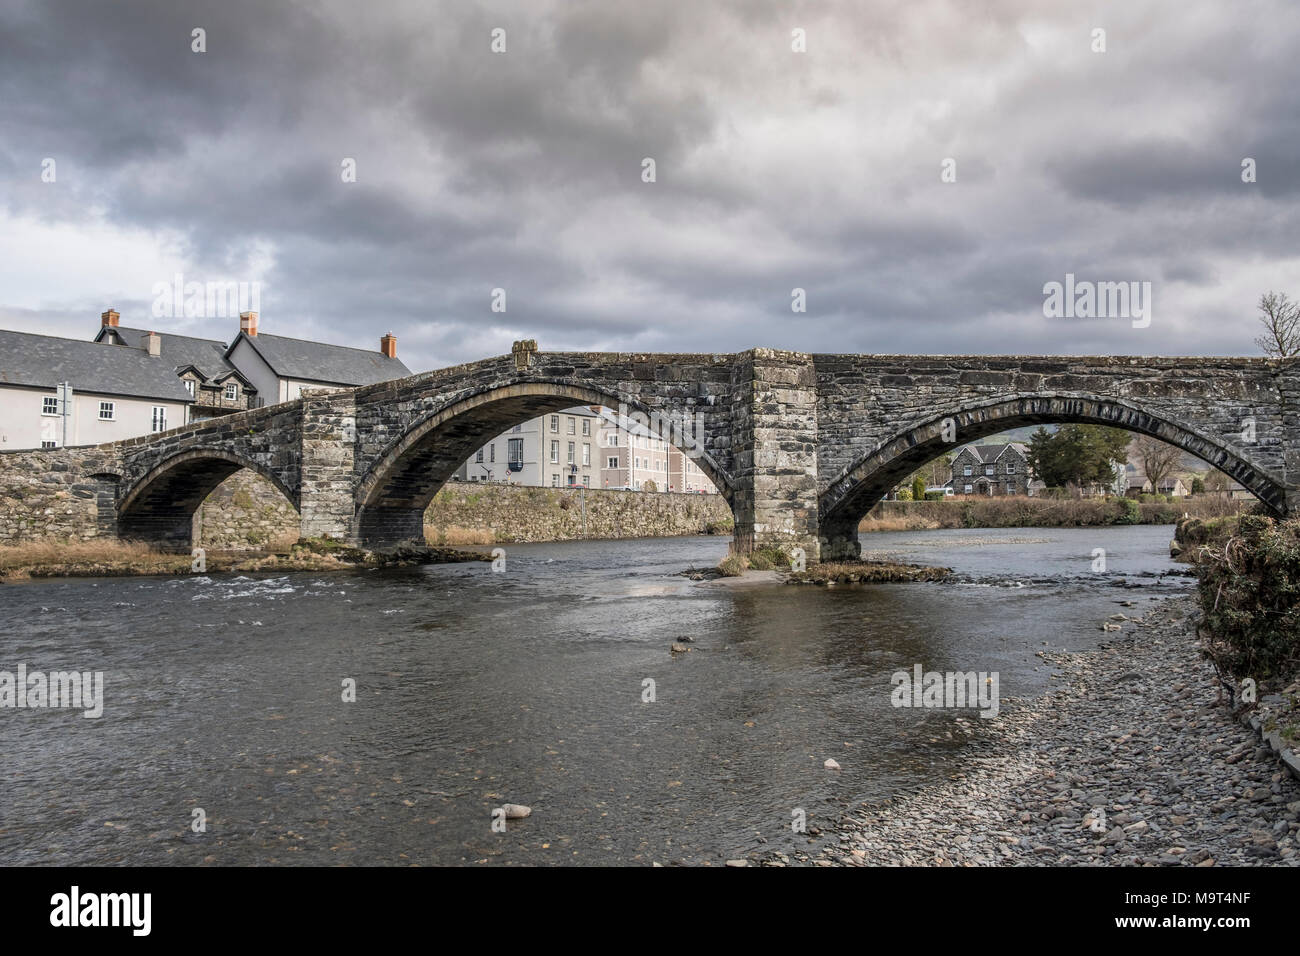 Pont Fawr, A Narrow three arch stone bridge in the Welsh town of Llanrwst, North Wales, UK Stock Photo